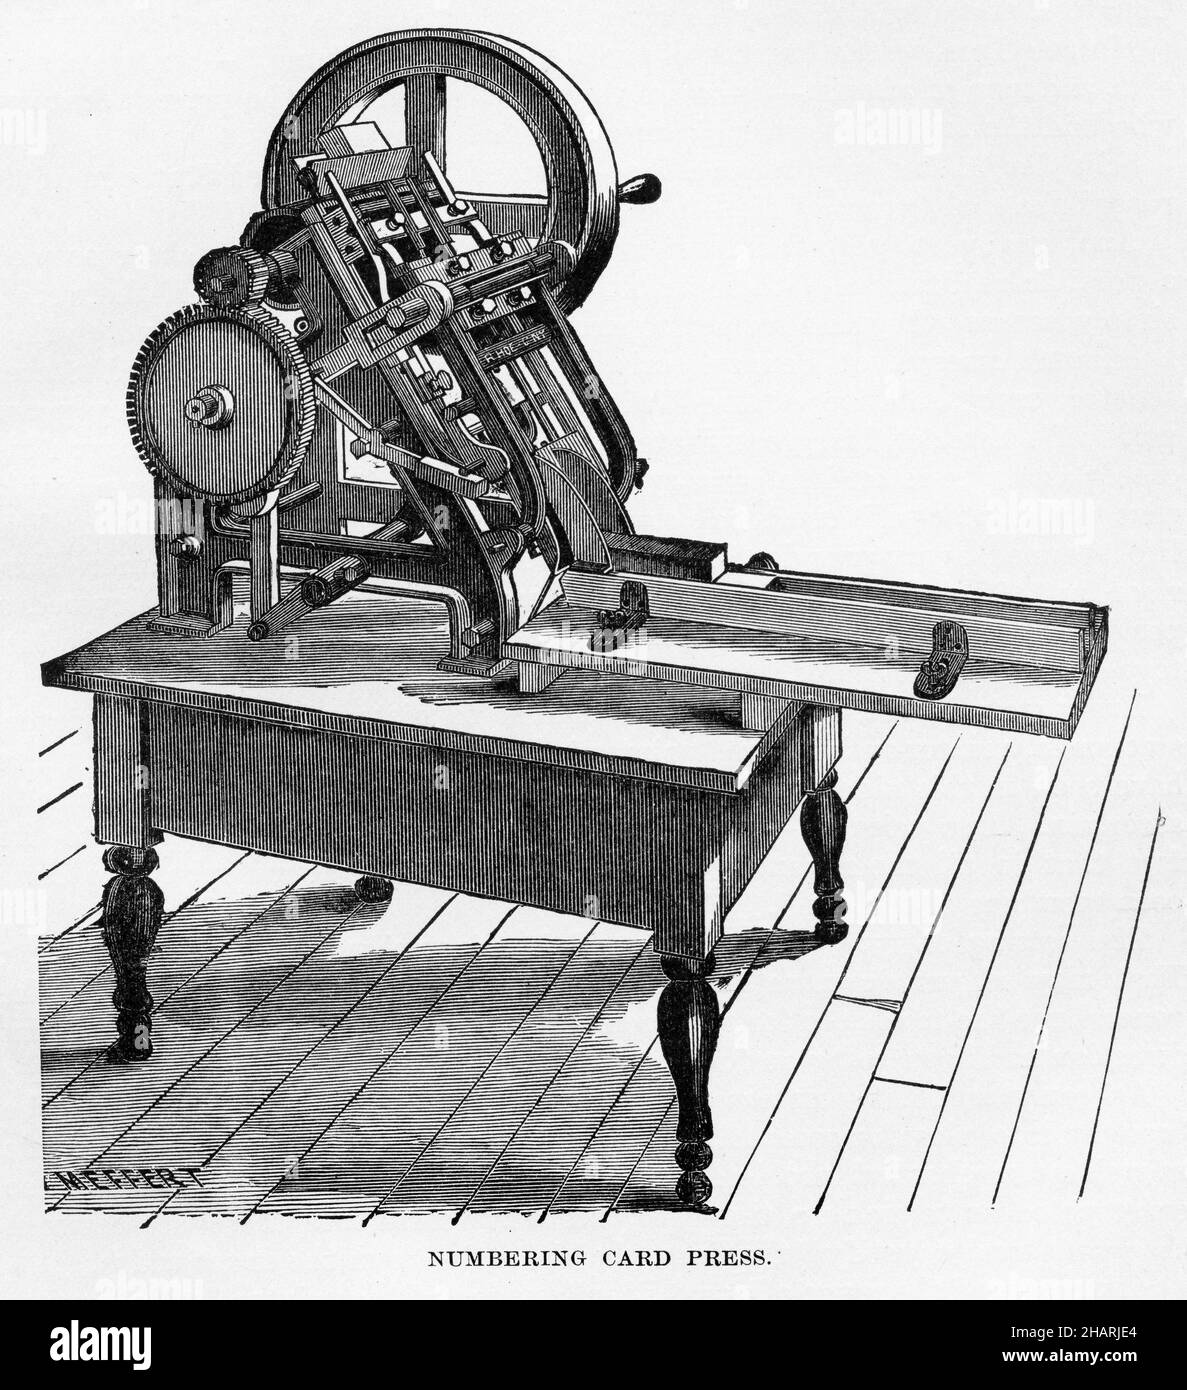 Engraving of a numbering card press Stock Photo